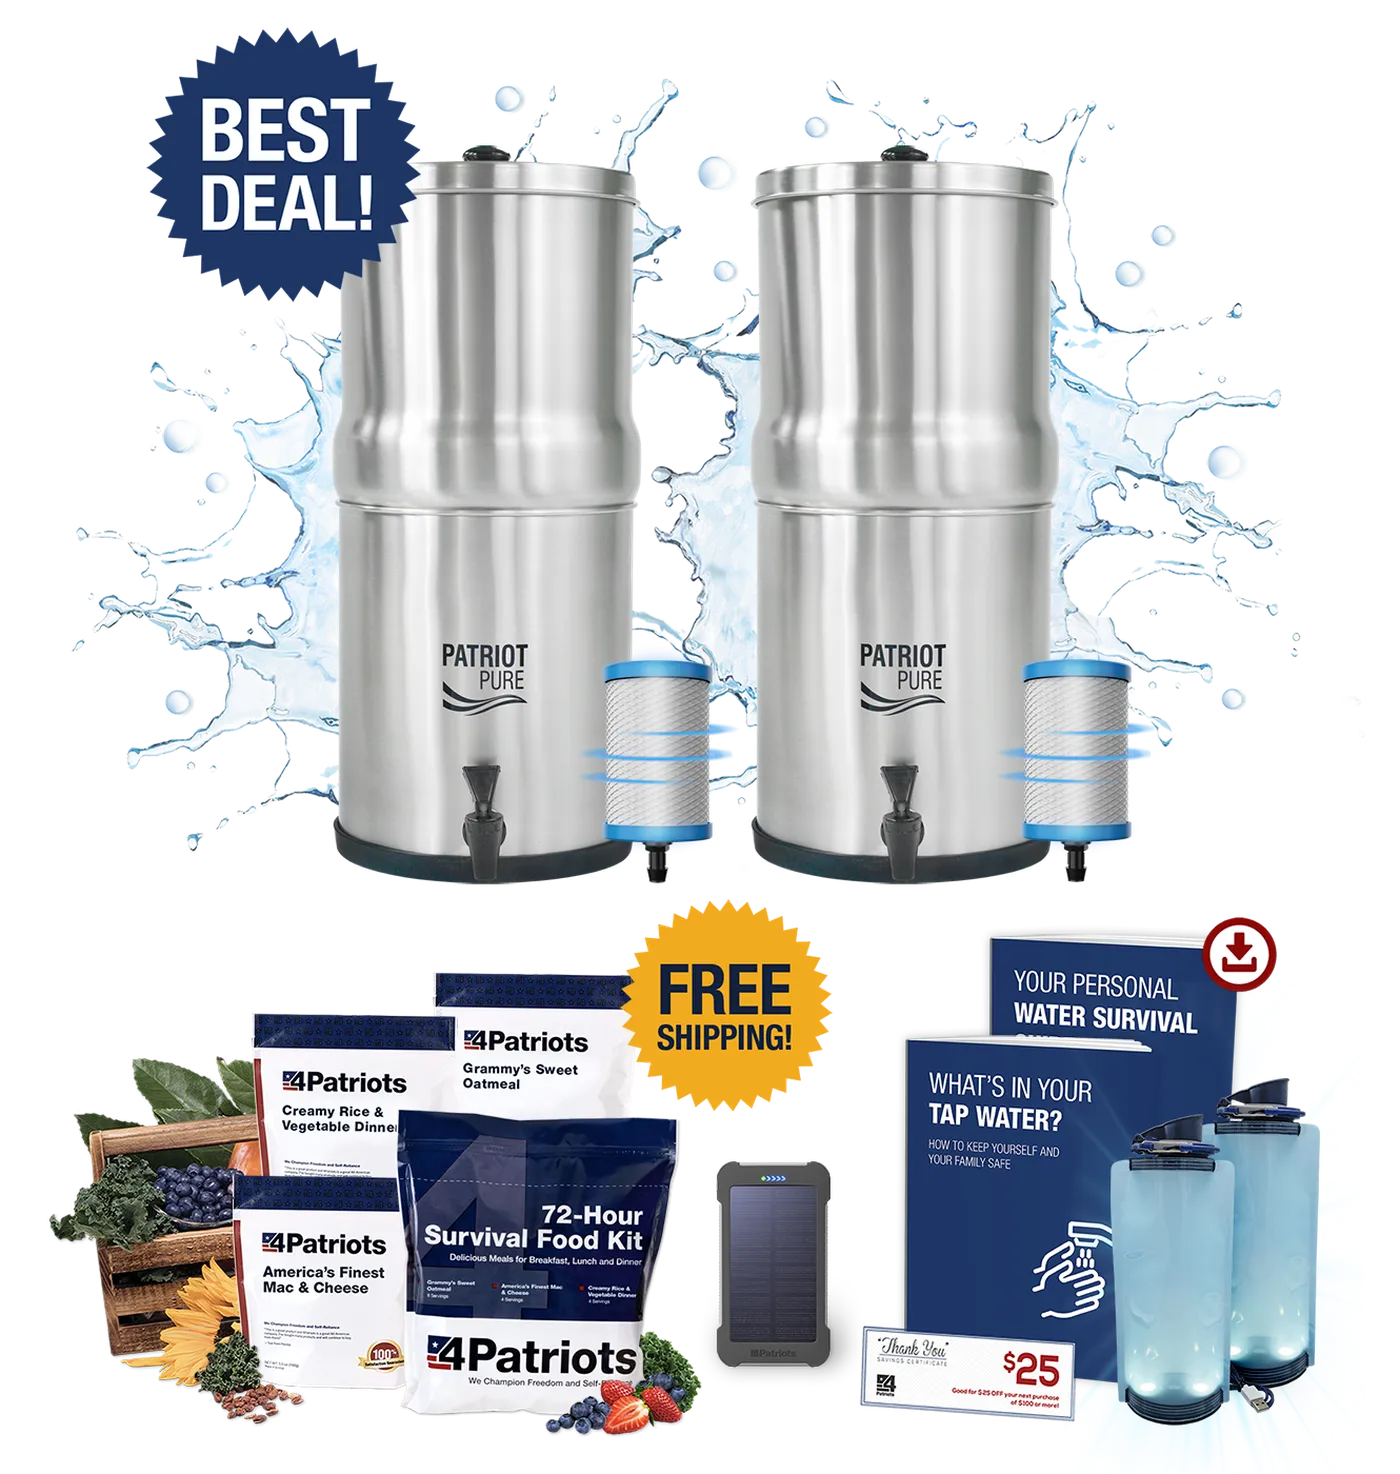 2 unit of the 4Patriots Ultimate Water Filtration Systems with survival food and water storage free gifts